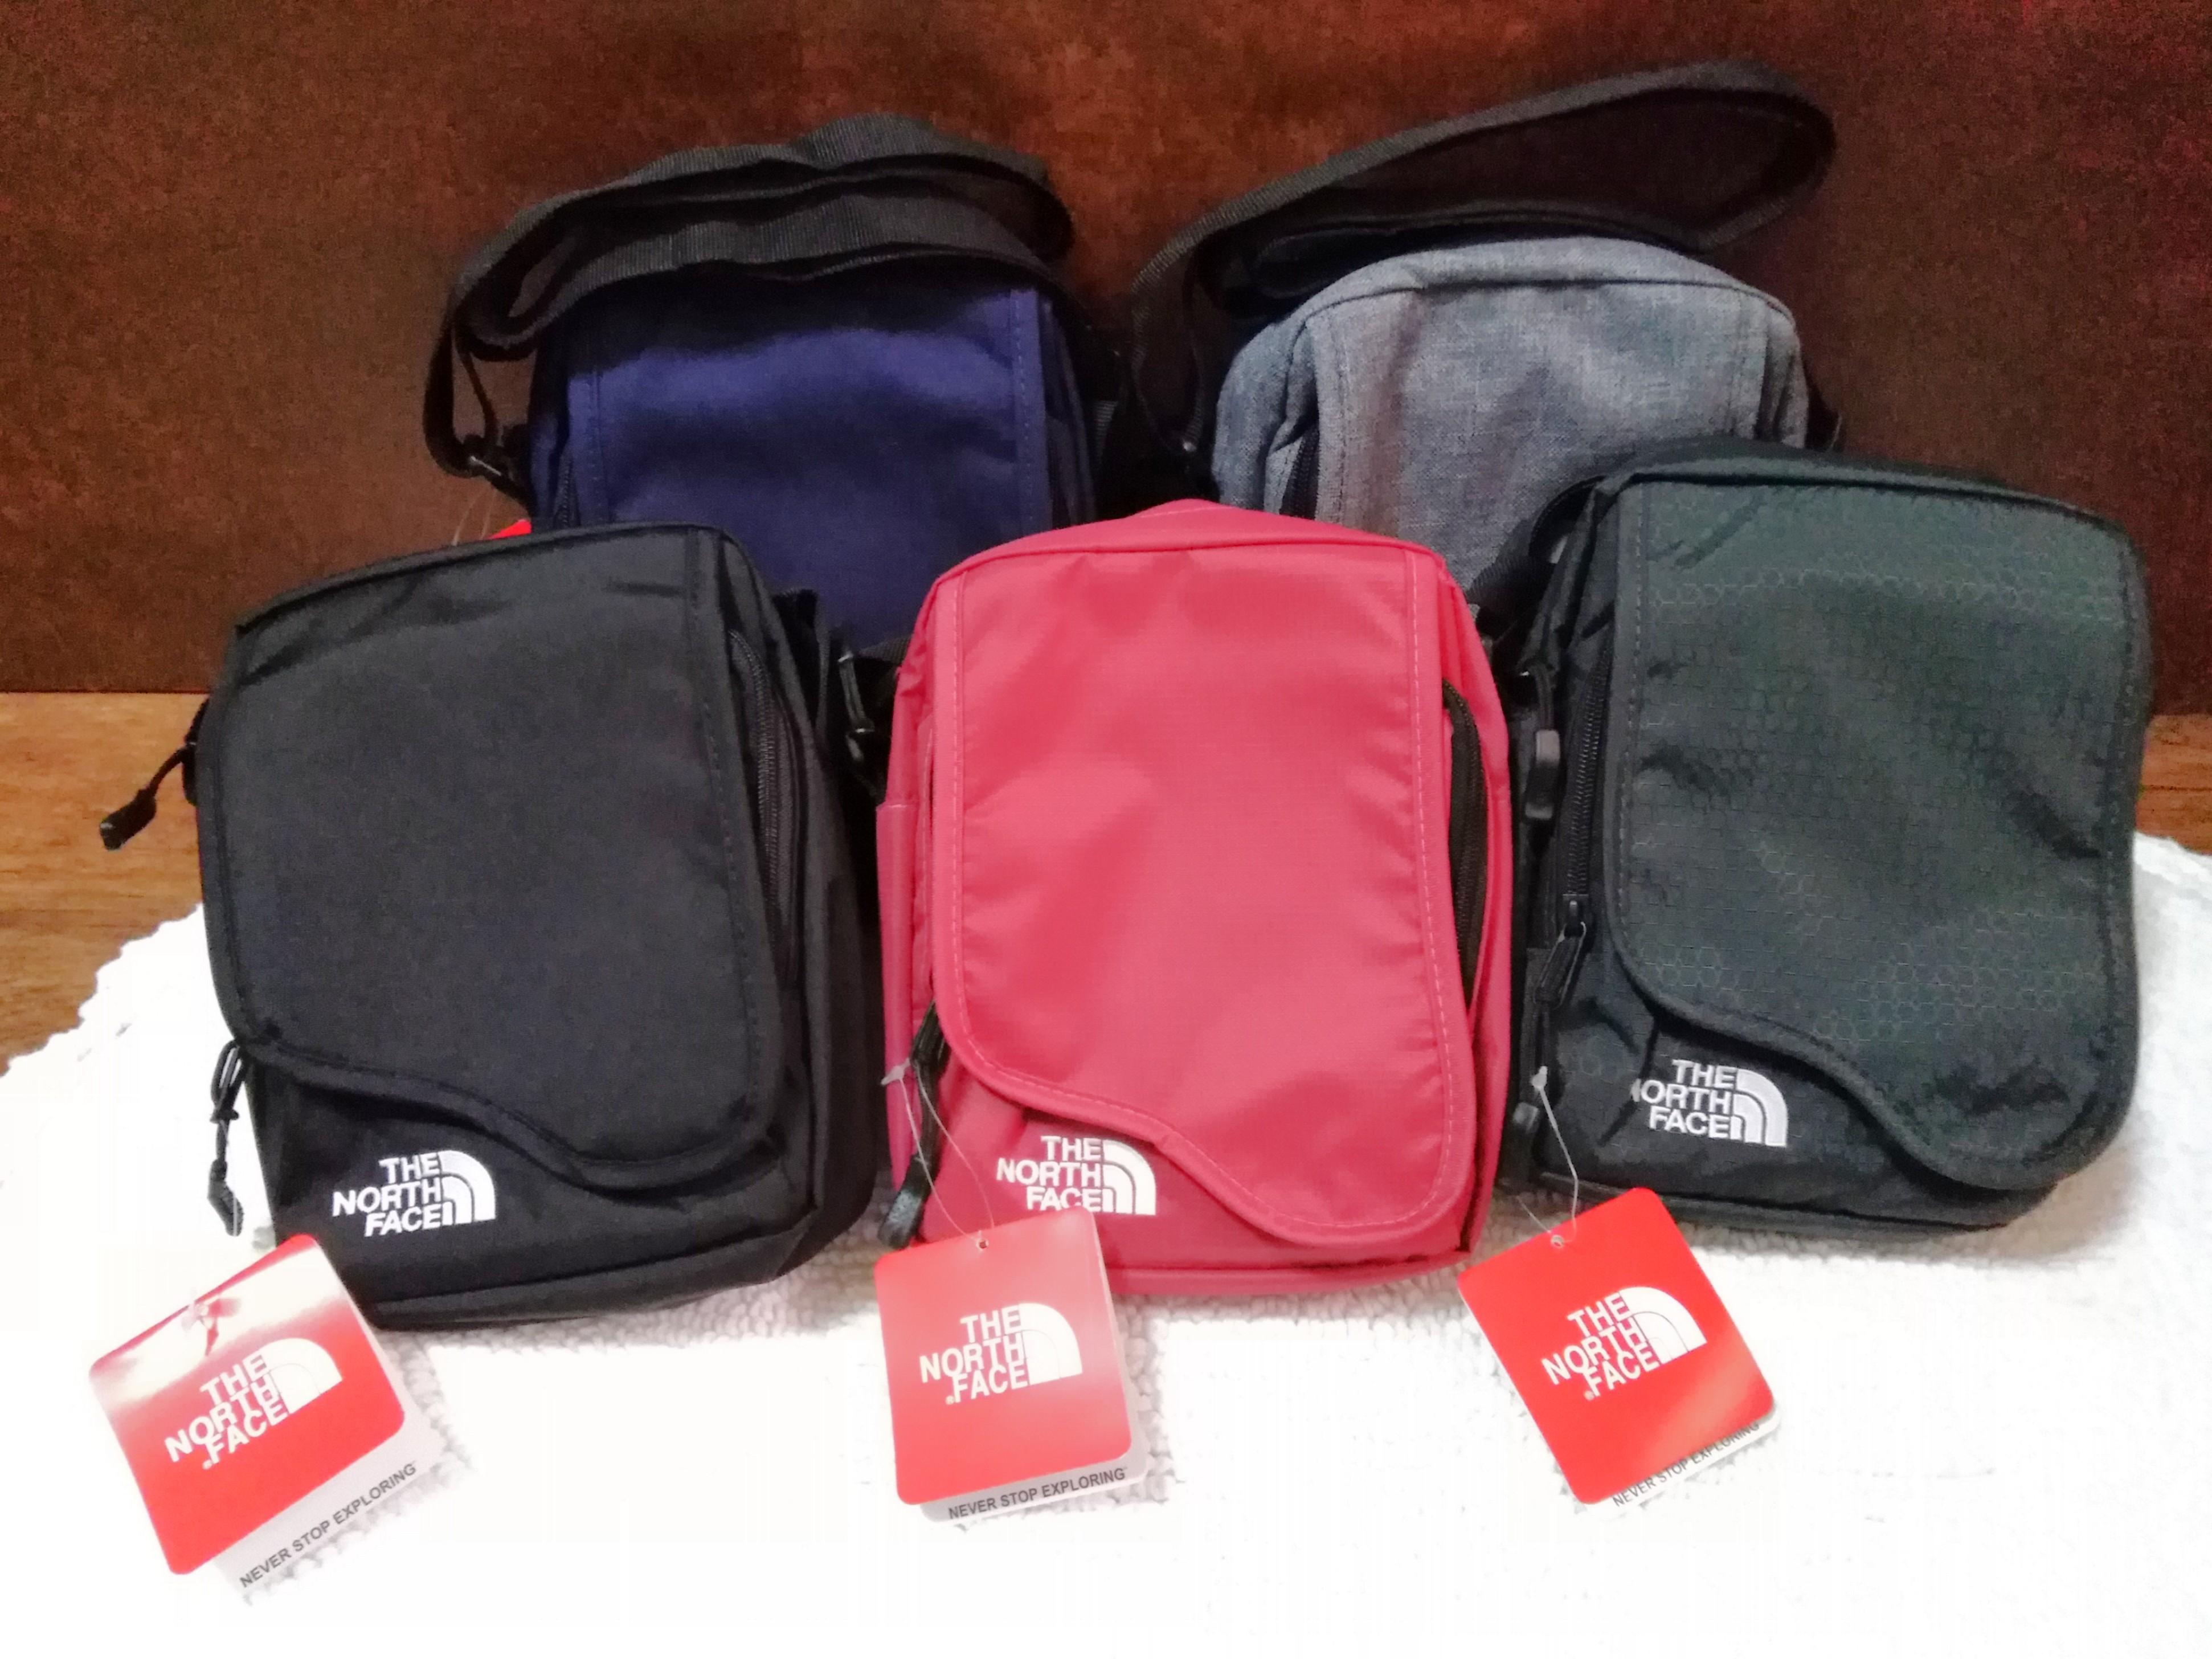 the north face bag price